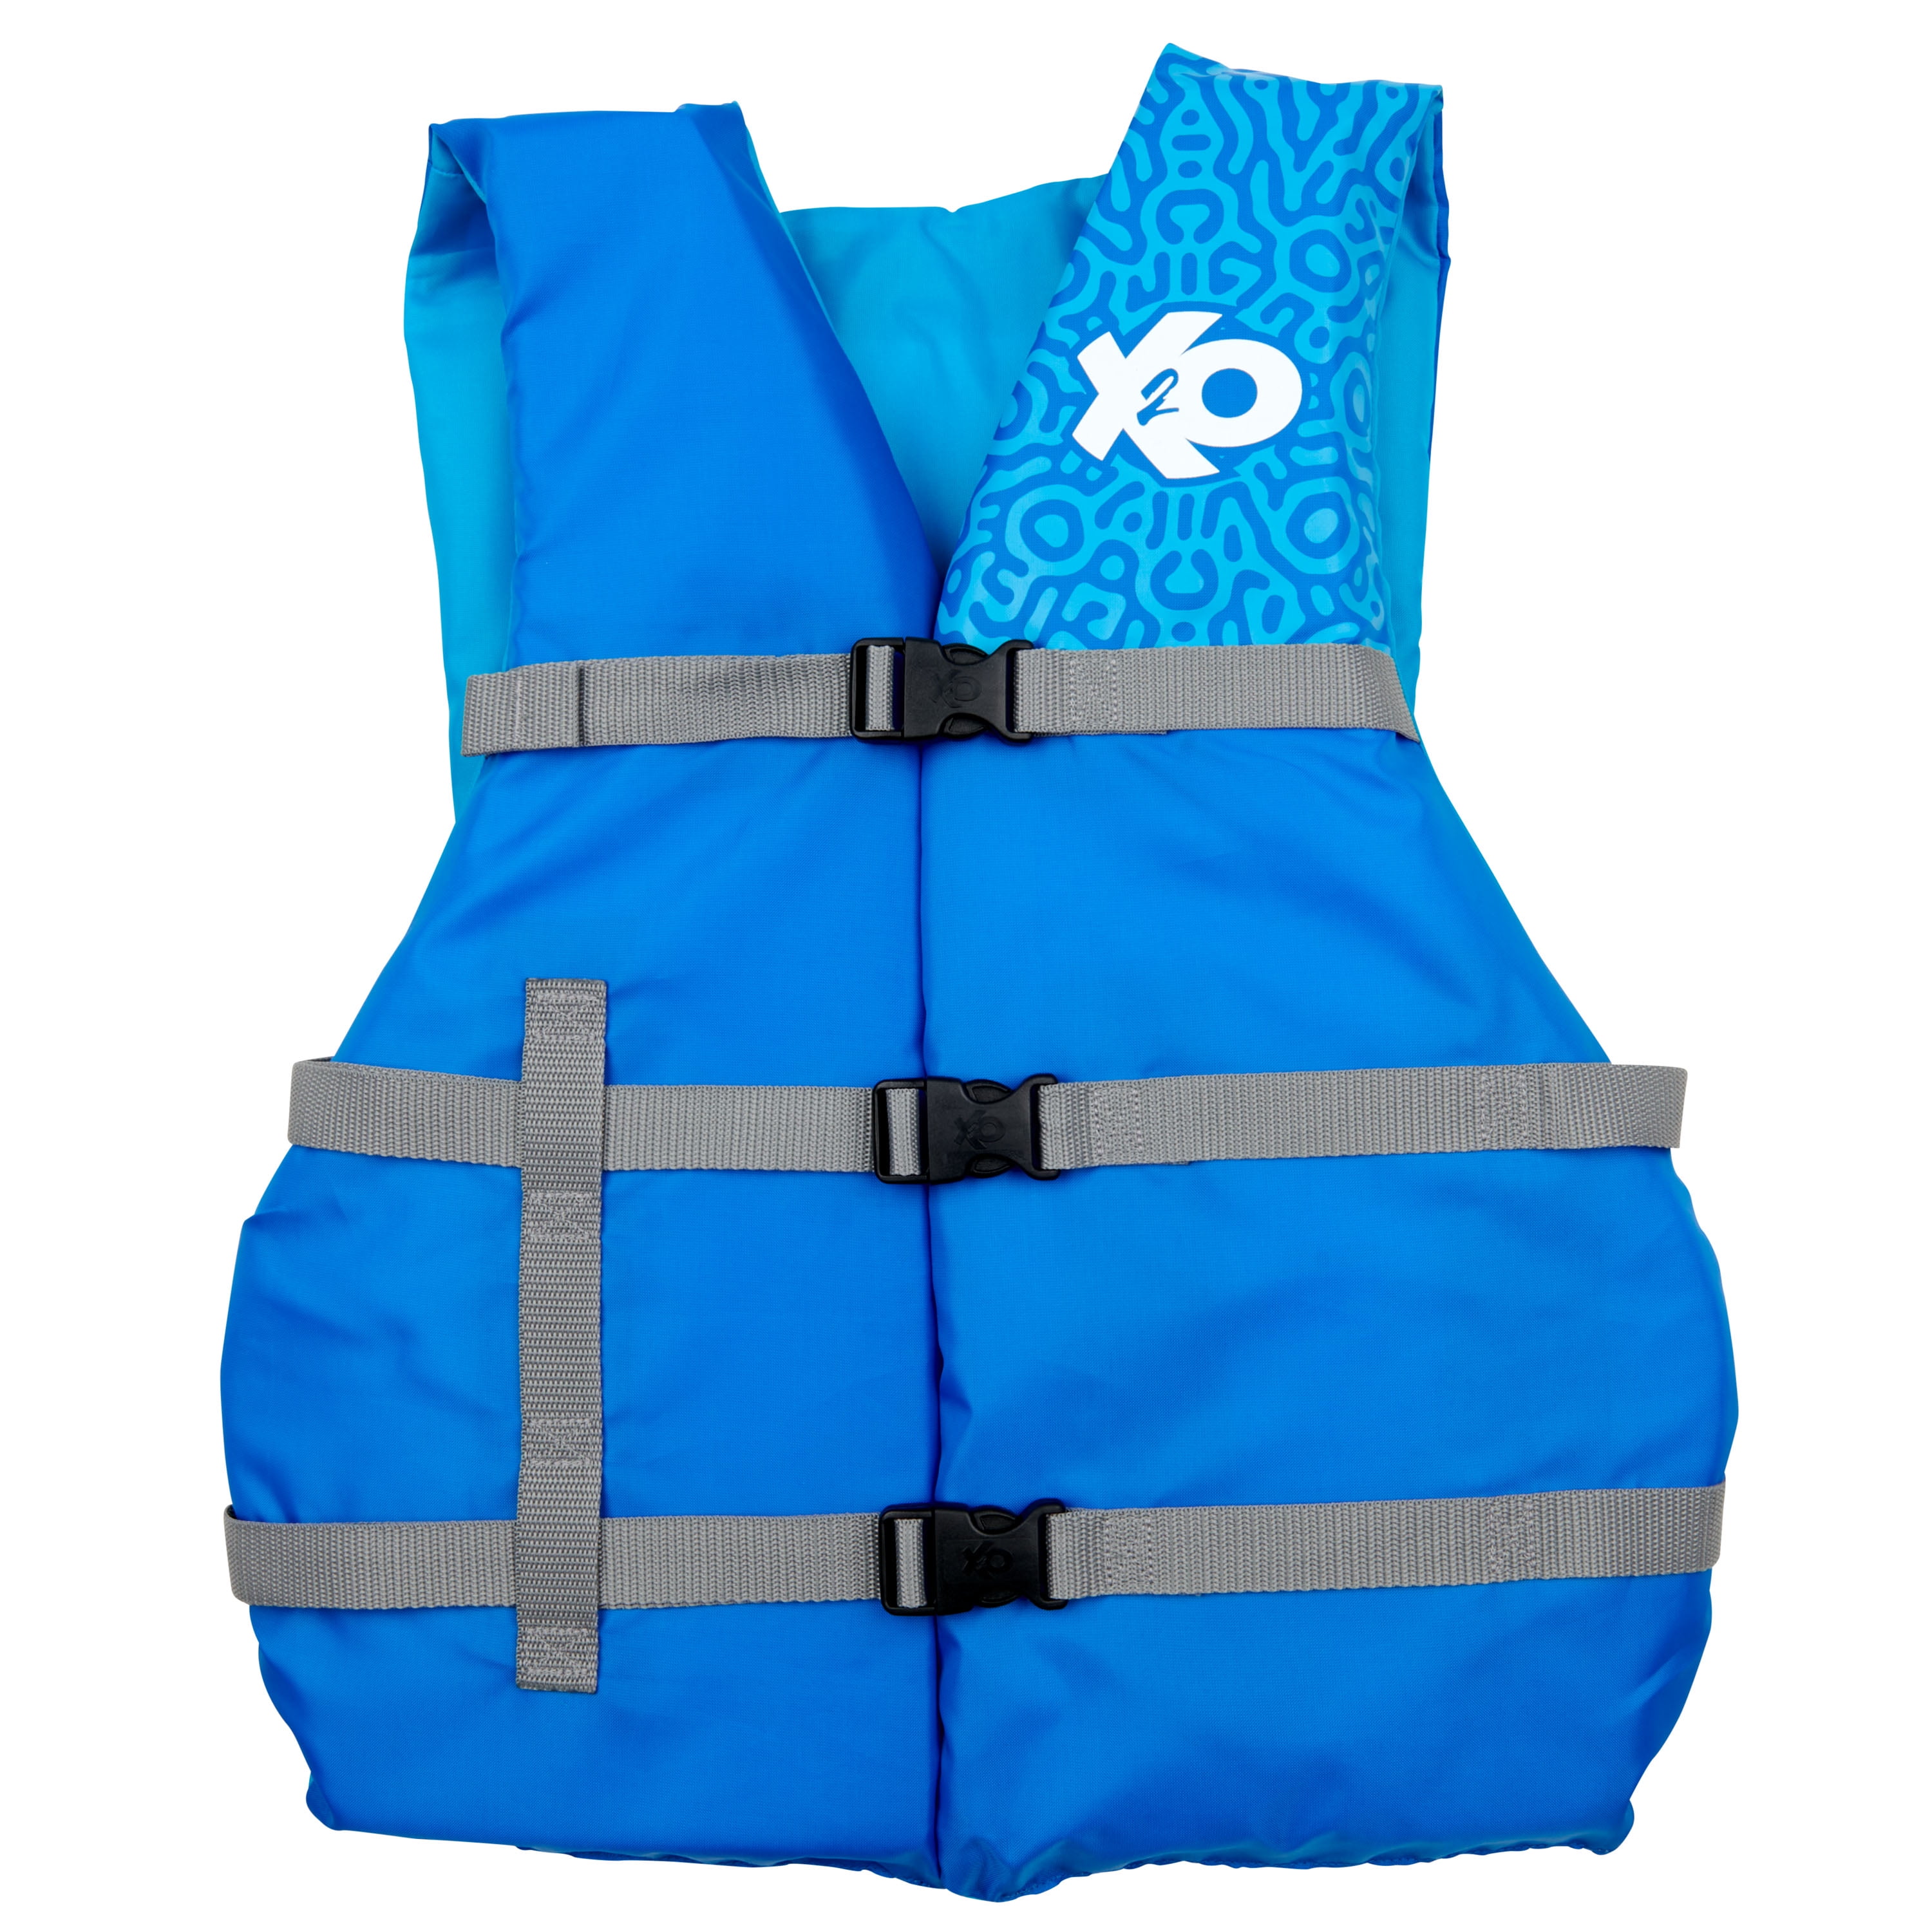 Life Jackets To Be Worn health and safety water swimming warning 205 x 290mm 